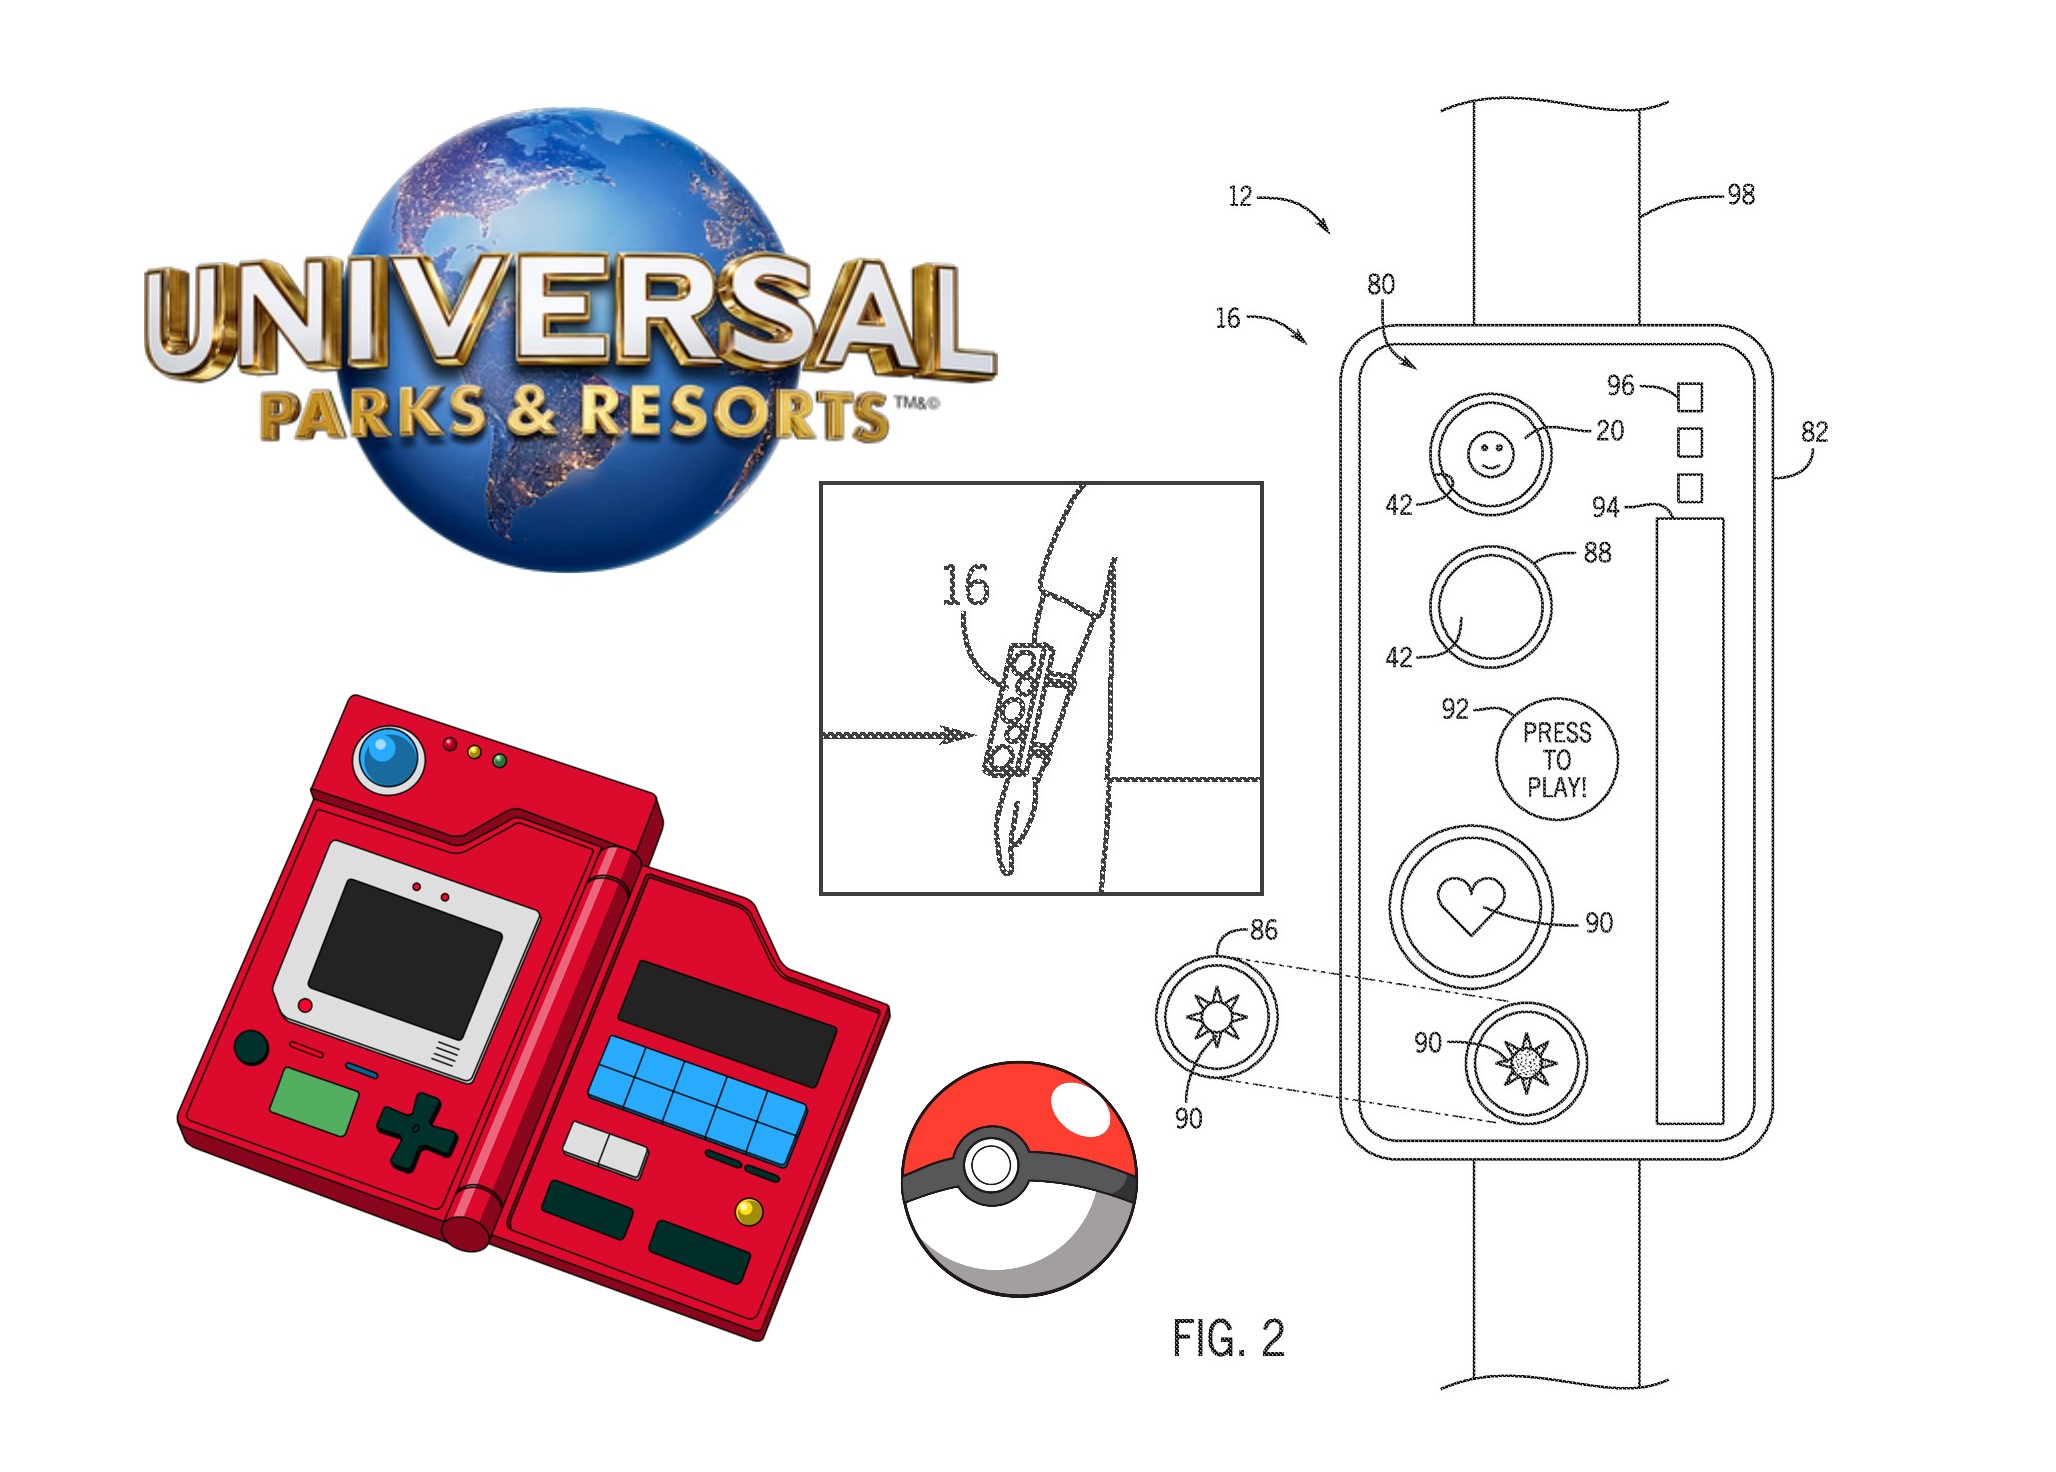 Patent from Universal Could Gamify Theme Parks and Possibly Be for Pokémon Attractions